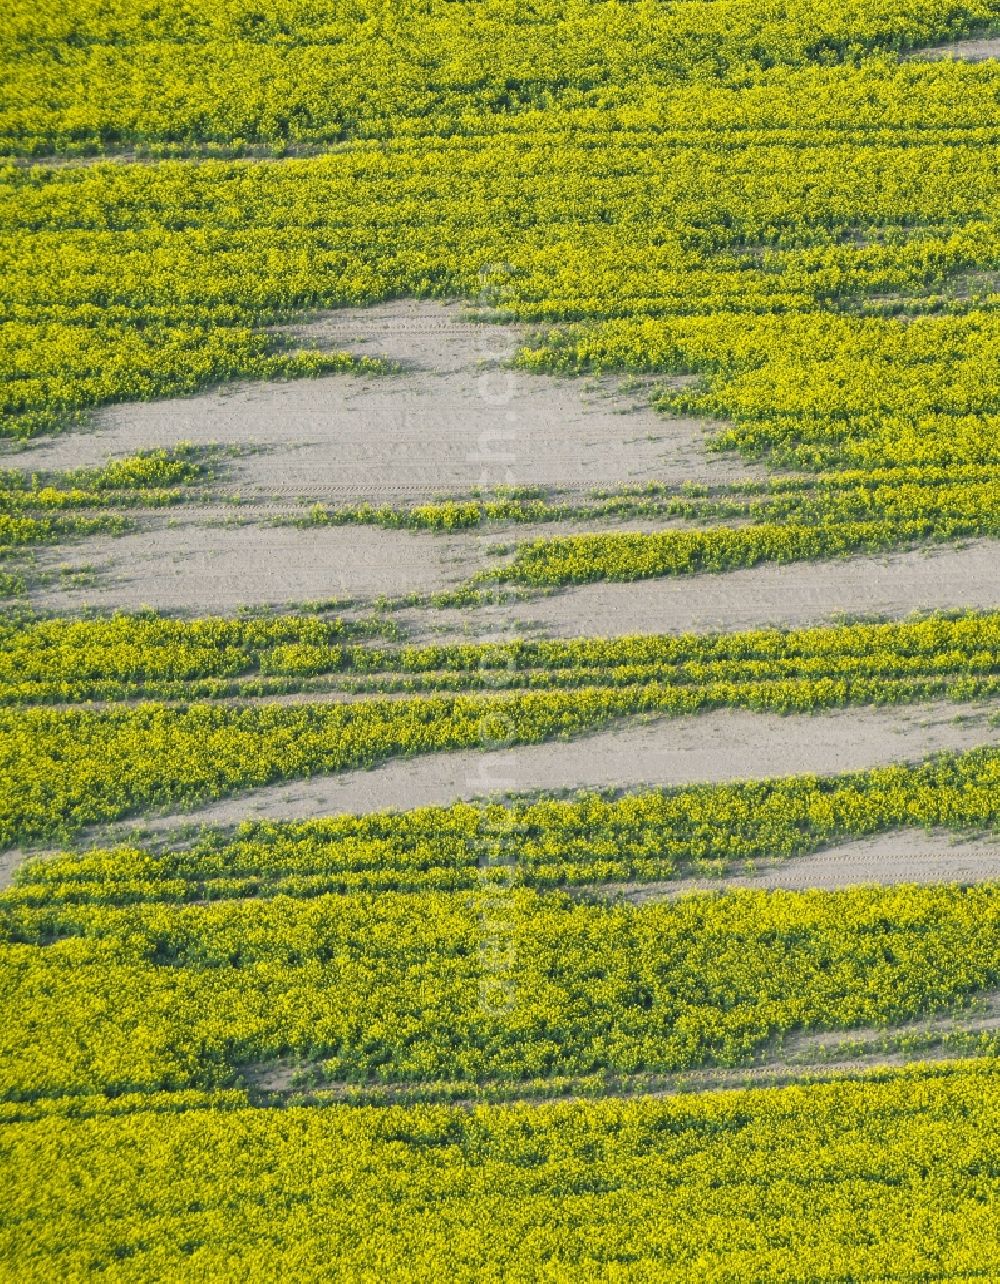 Pretzier from the bird's eye view: Soil erosion and drought structures on agricultural rape fields in Pretzier, Saxony-Anhalt, Germany